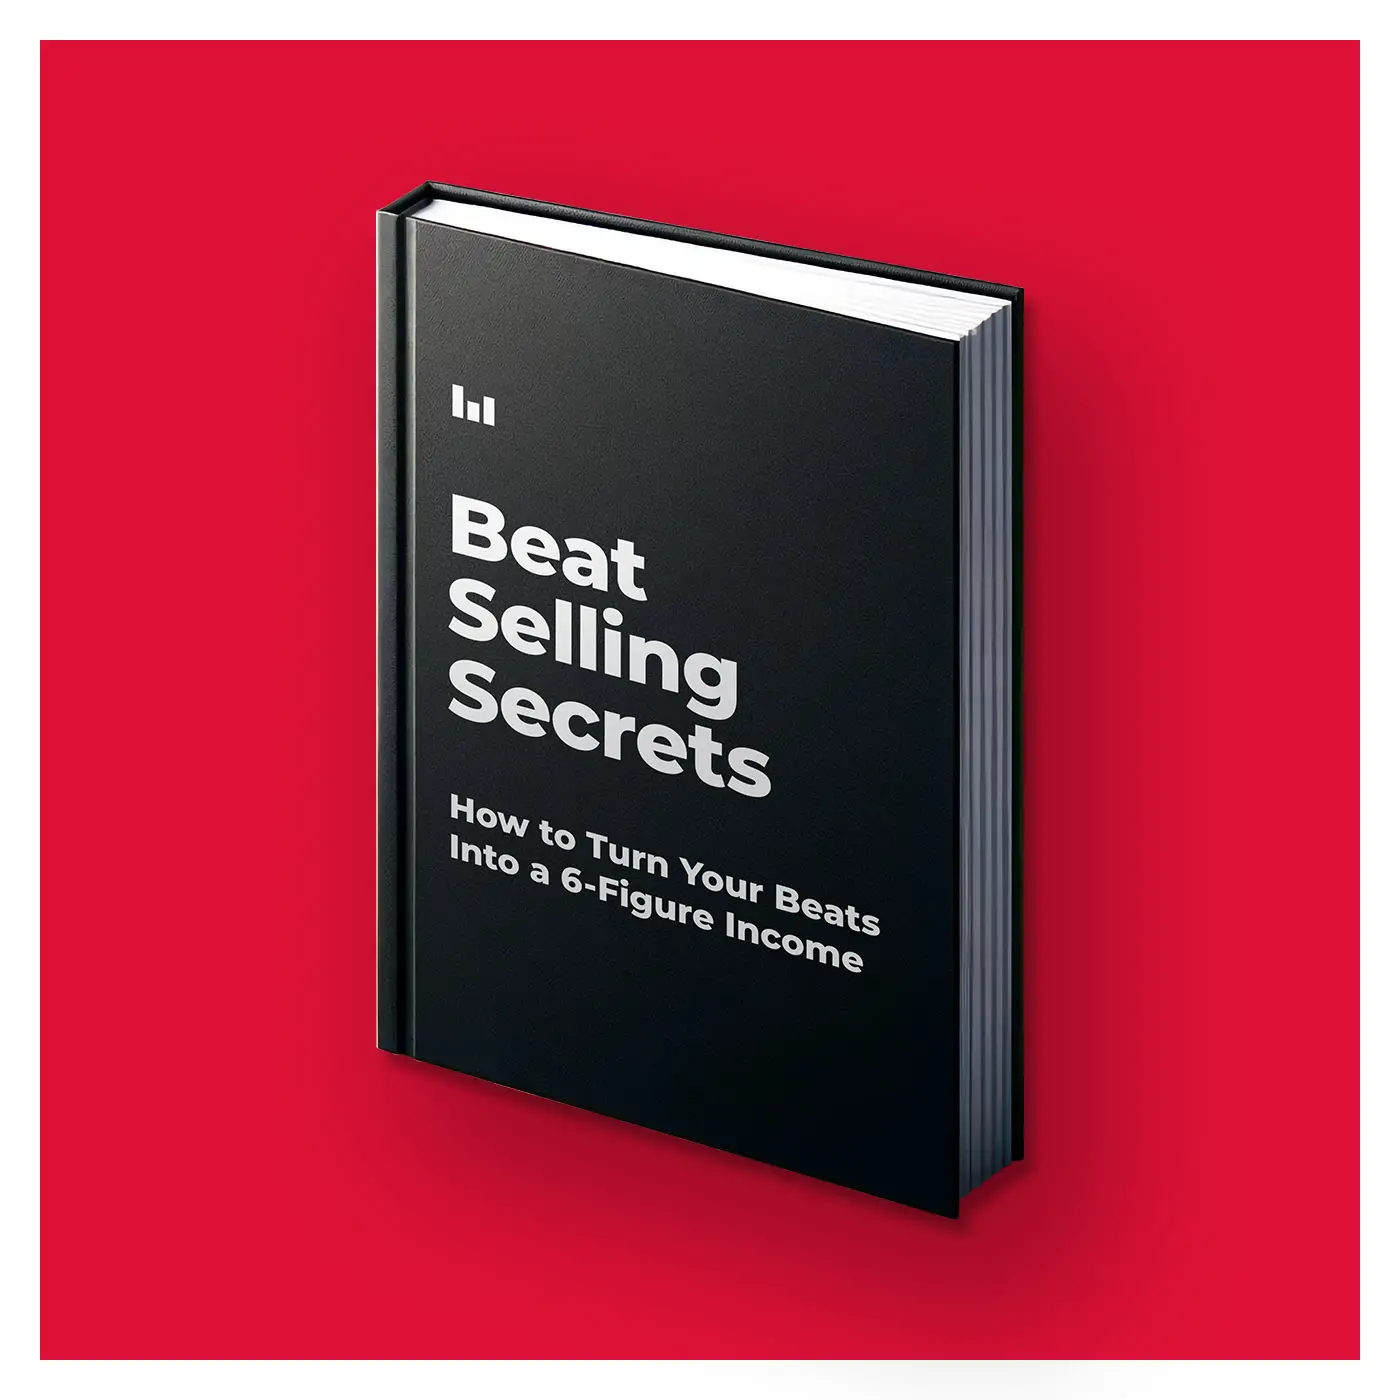 Learn to sell beats online